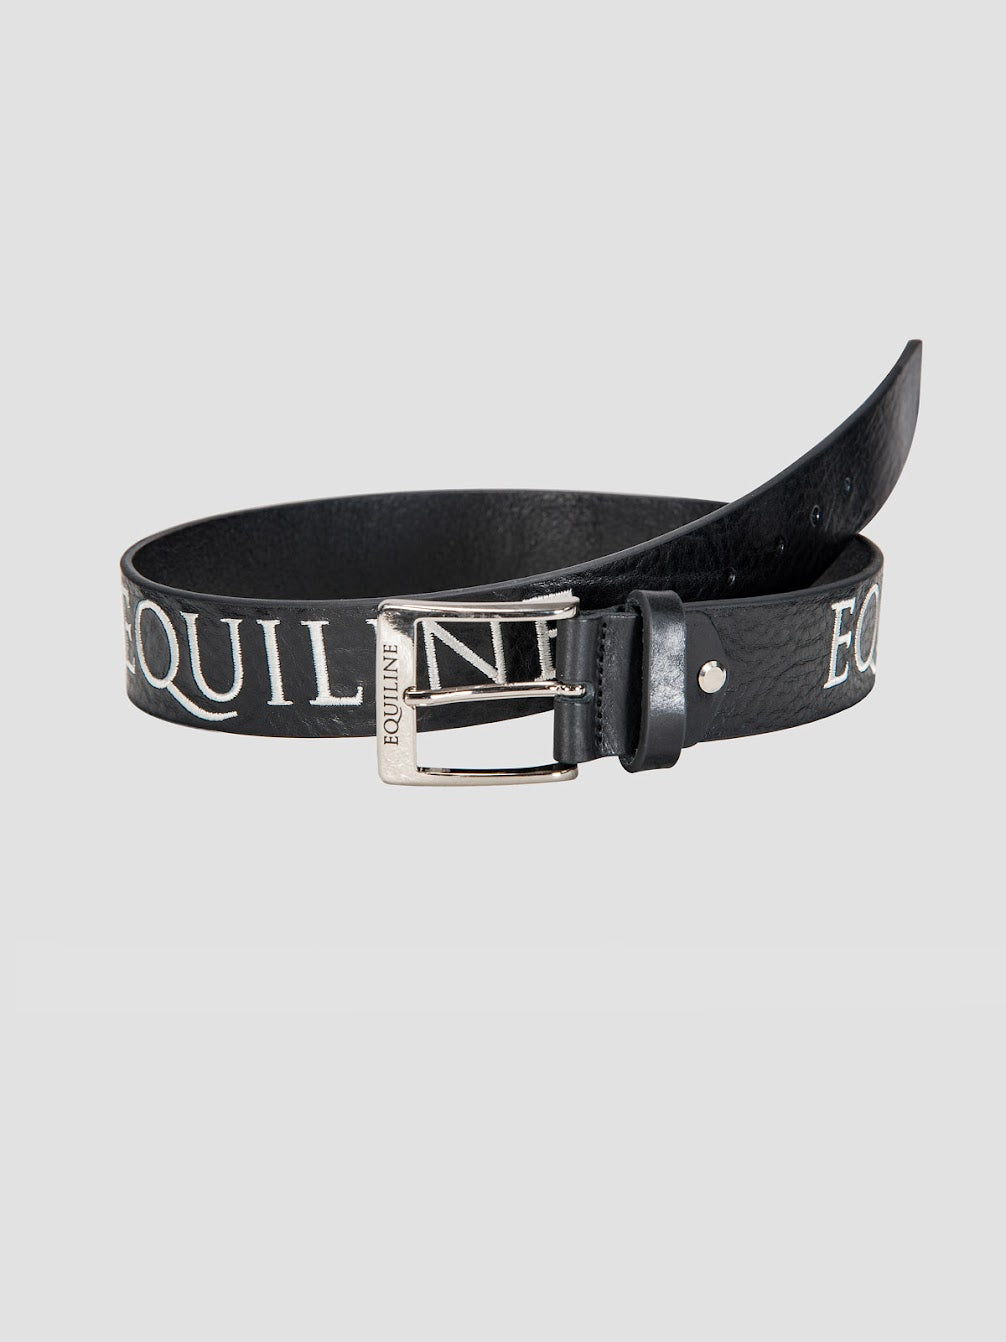 Equiline One Elastic Woven Belt. Made from luxury leather with the Equiline logo embroidered throughout the length. 